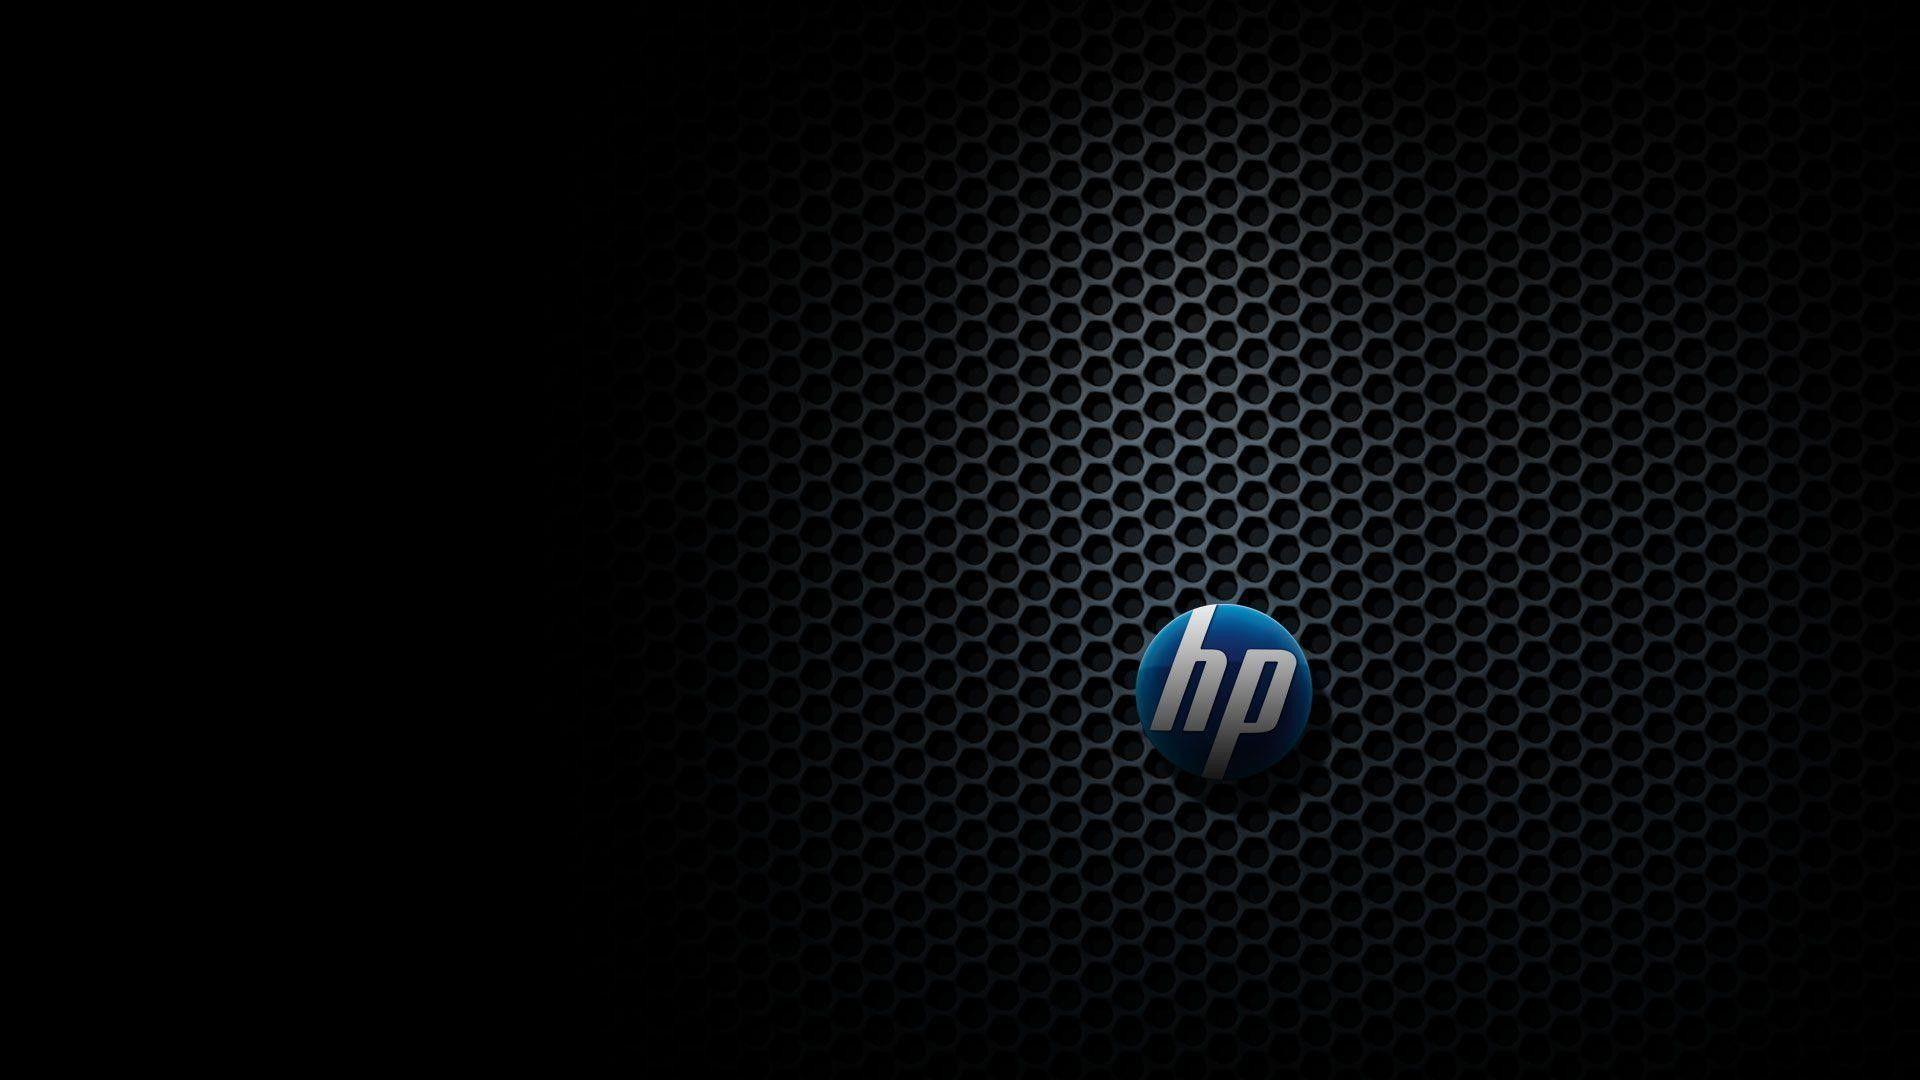 Hp Laptop Wallpapers Top Free Hp Laptop Backgrounds Wallpaperaccess